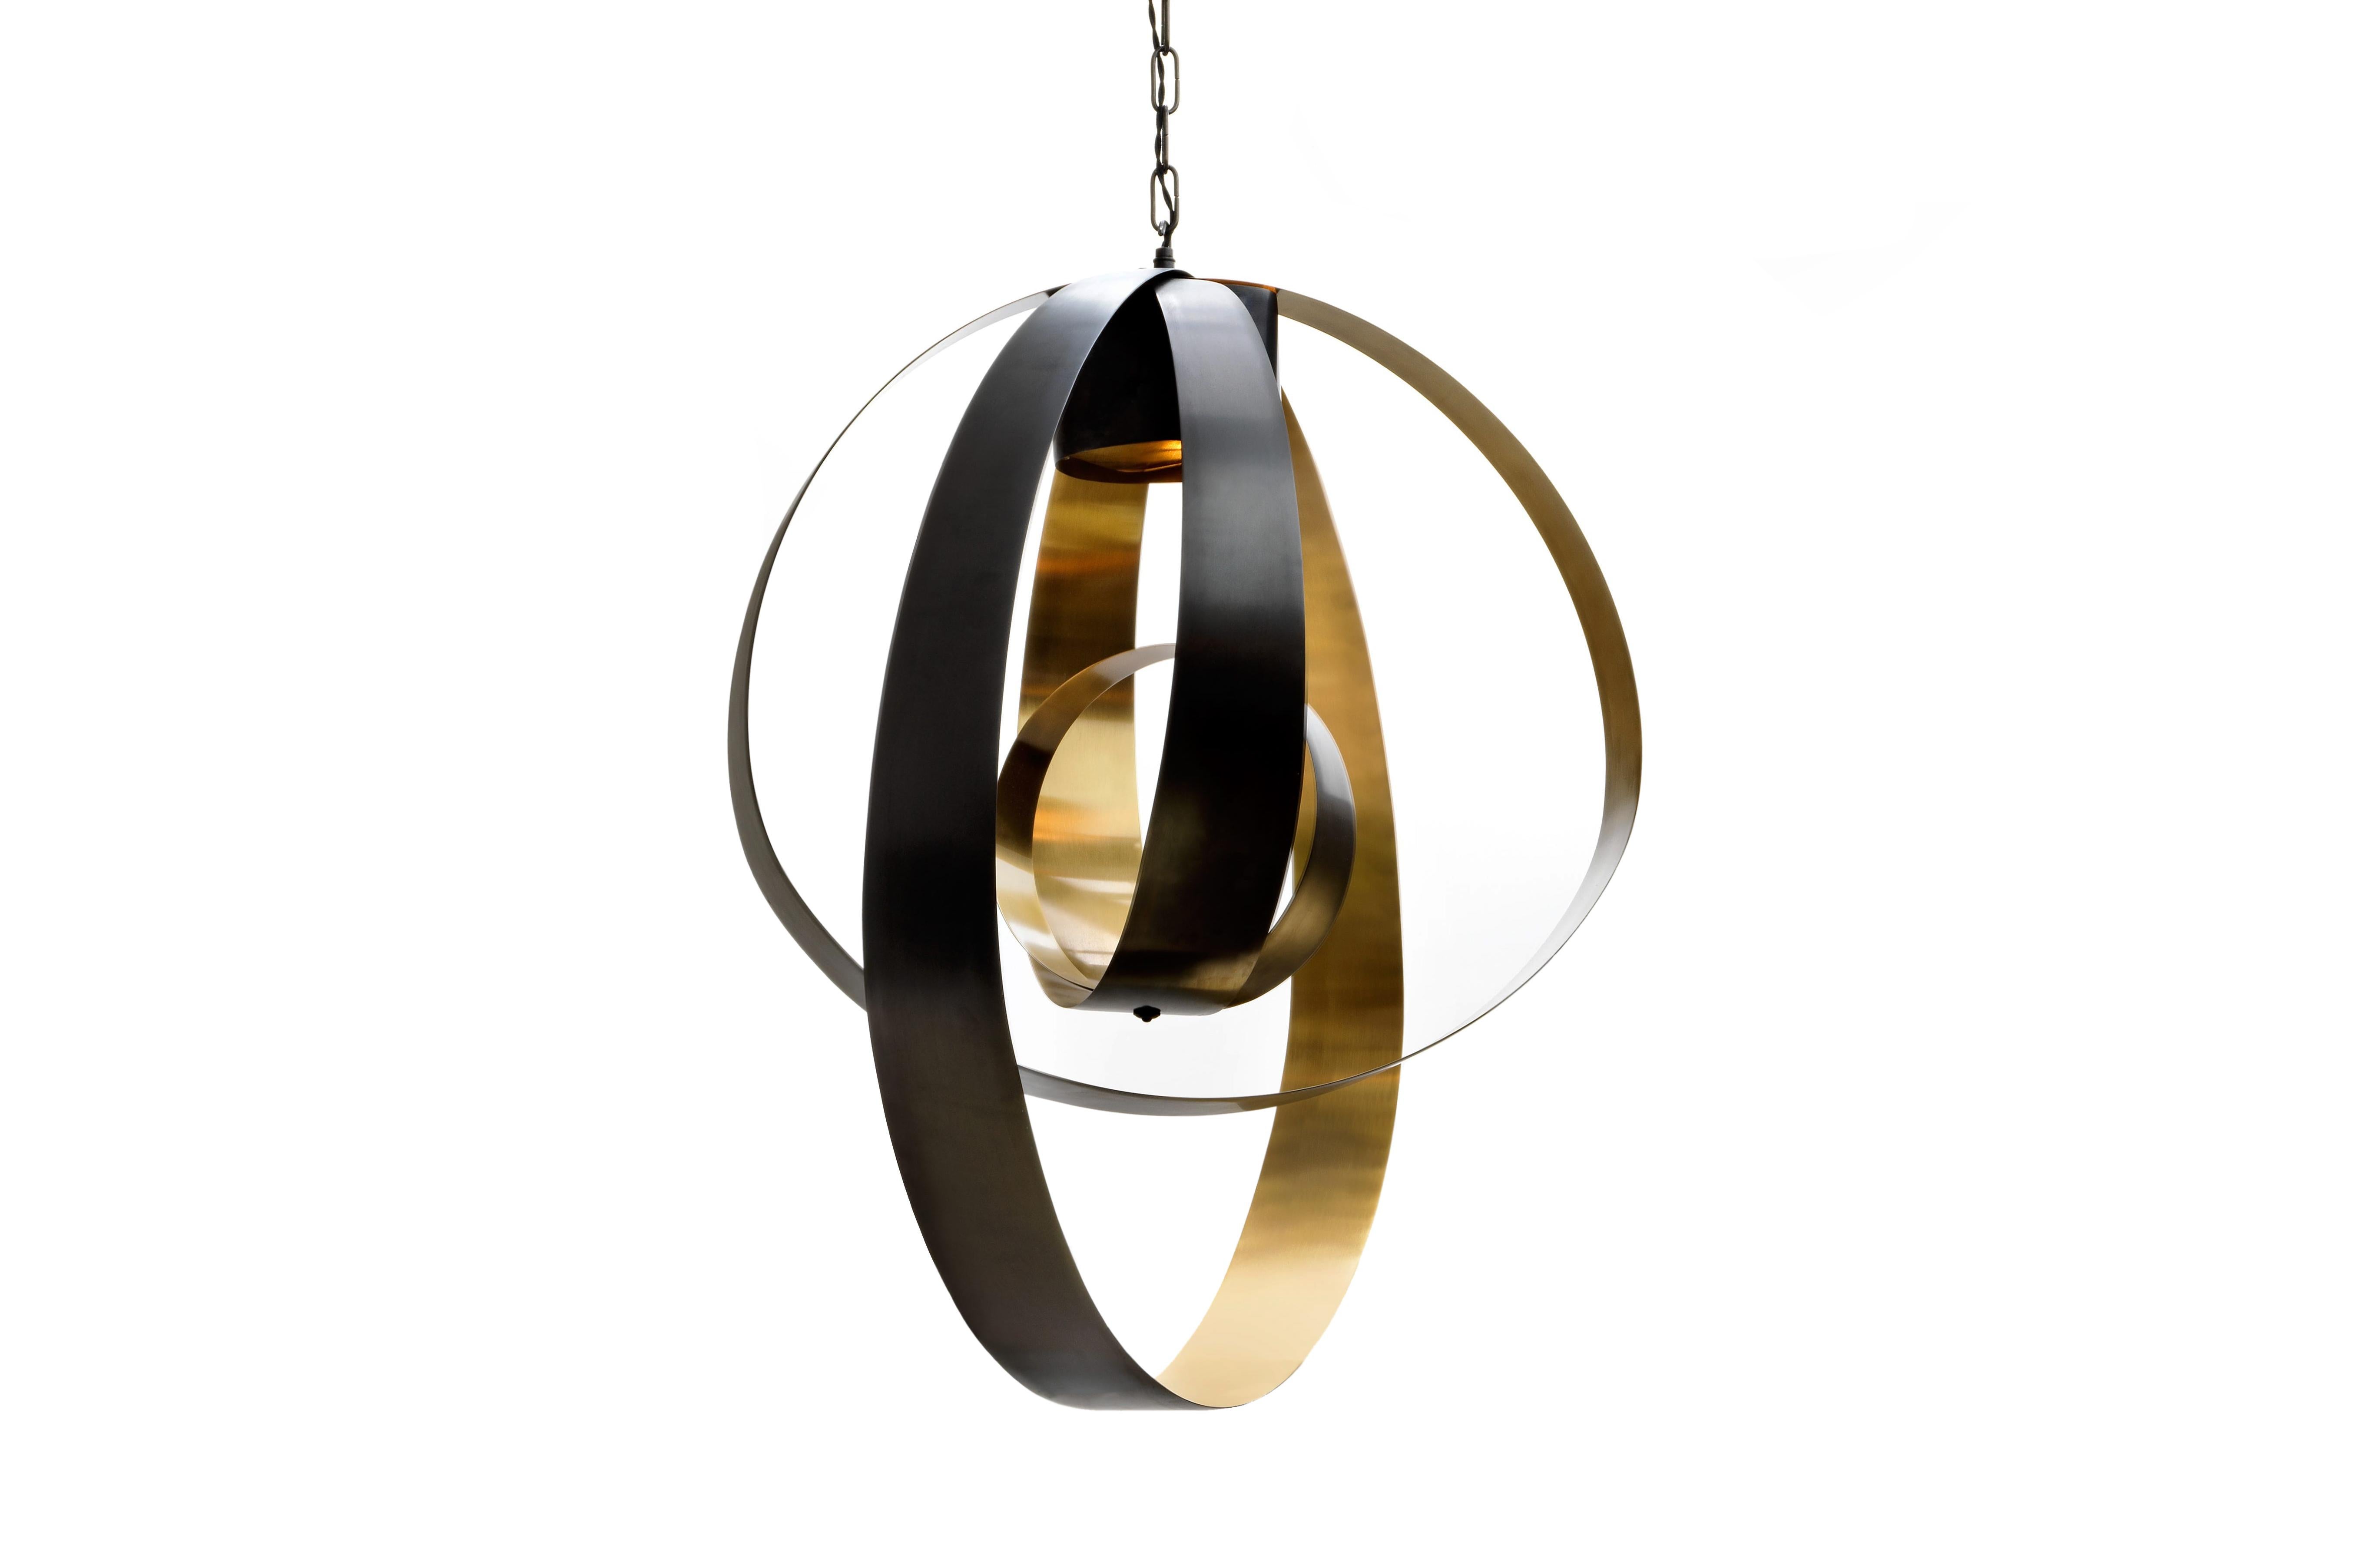 Lunar large pendant by CTO lighting
Materials: bronze with satin brass and bronze oval chain/black braided flex
Dimensions: H 80 x W 80 cm

All our lamps can be wired according to each country. If sold to the USA it will be wired for the USA for